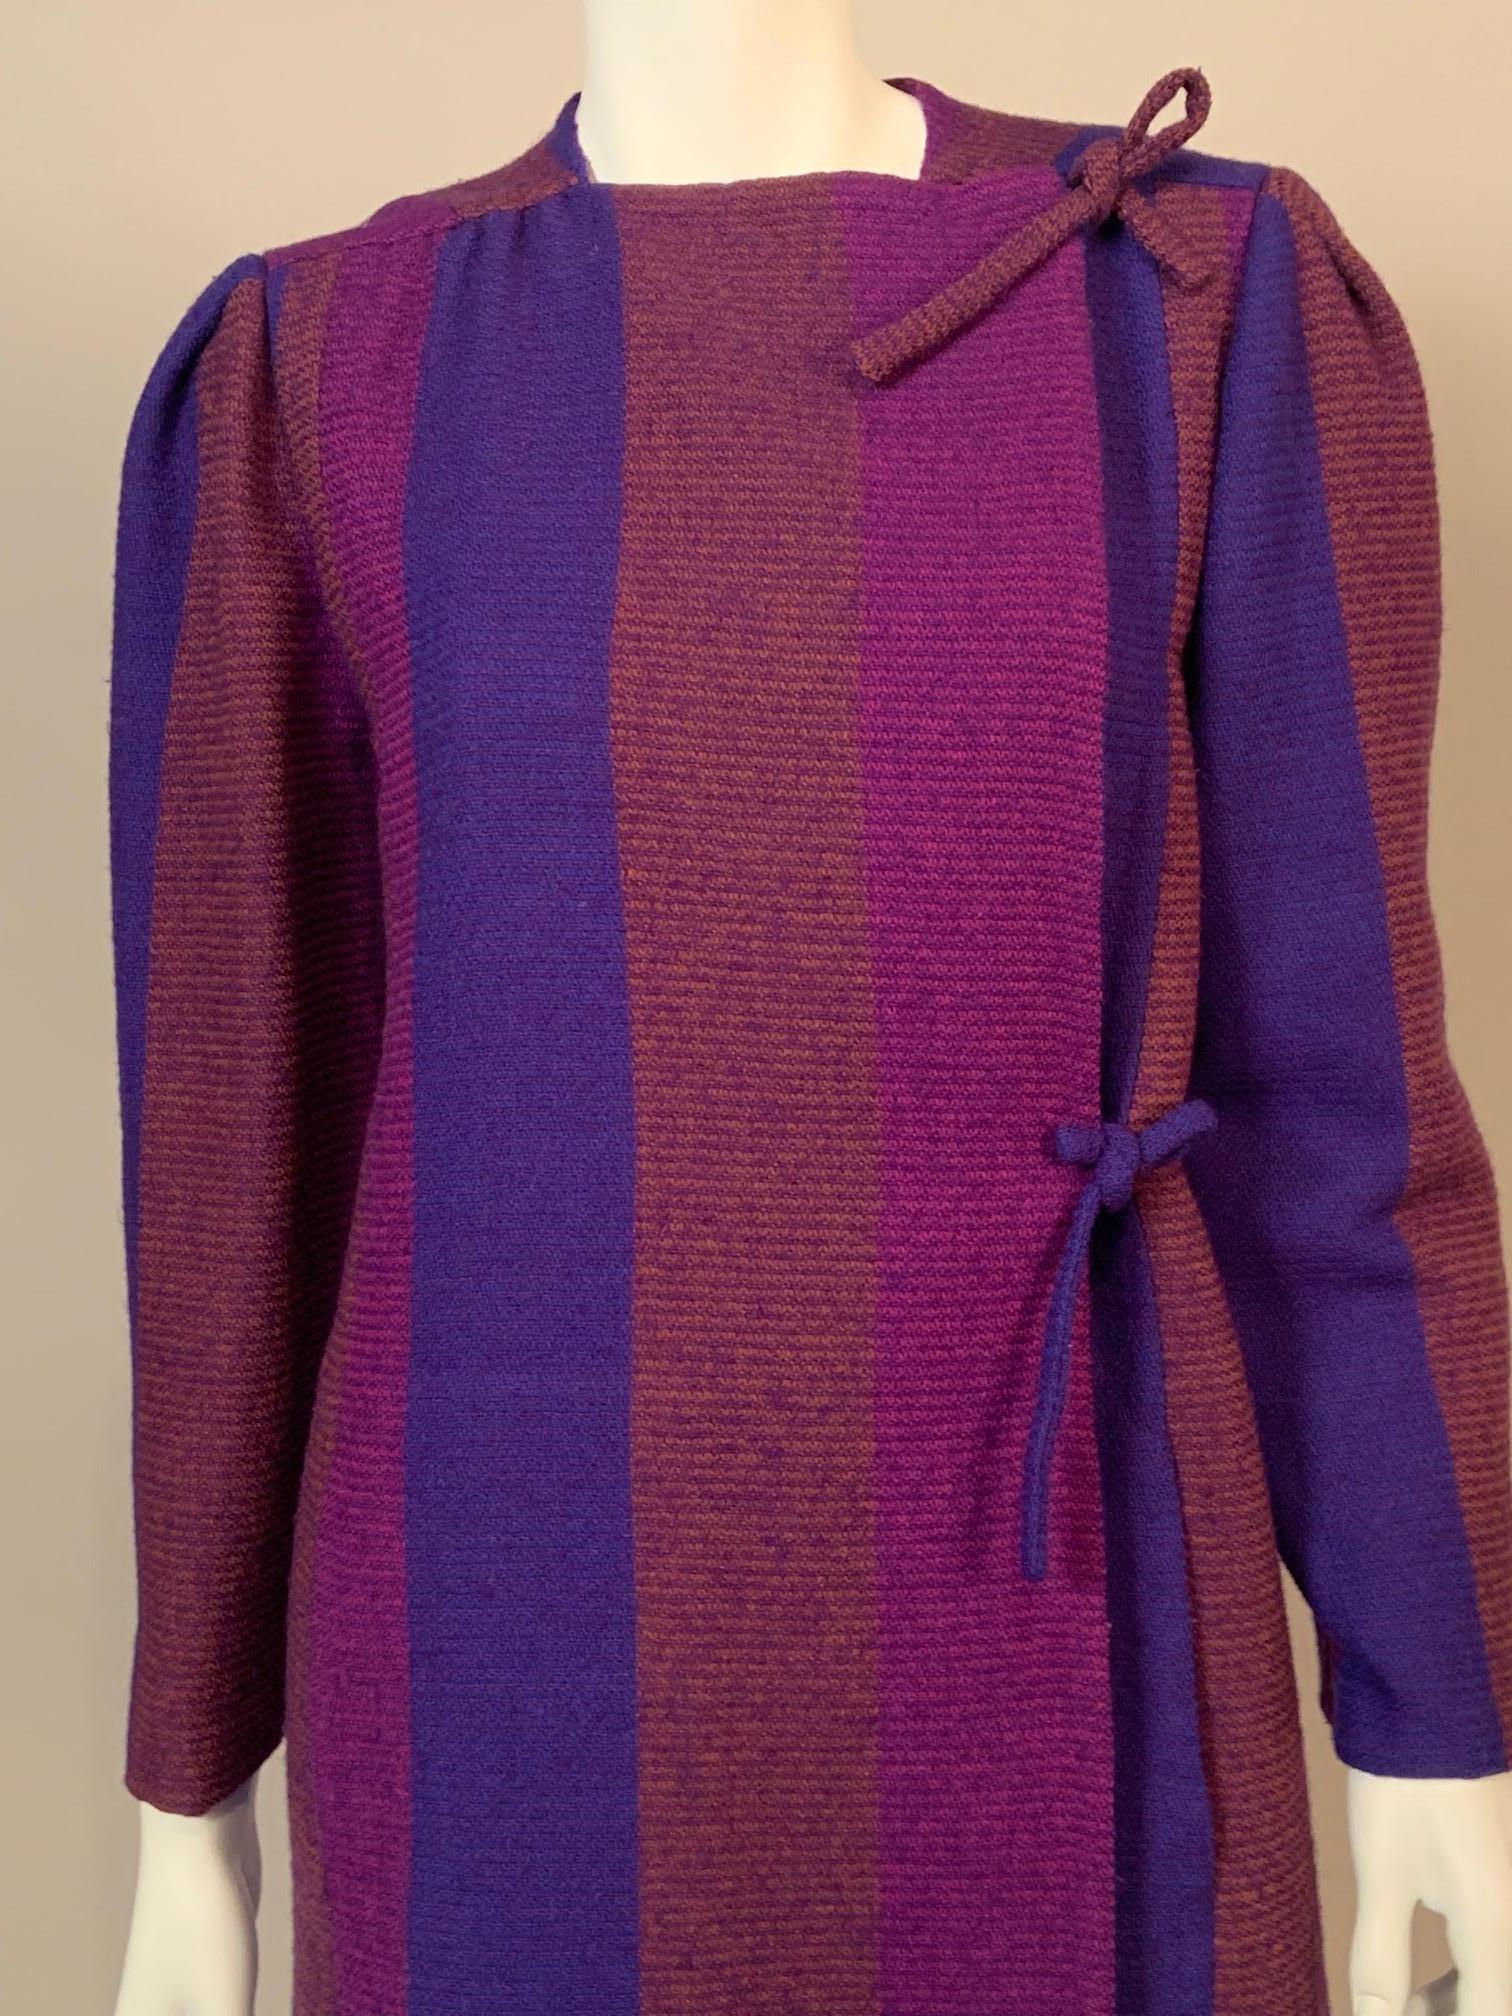 Pauline Trigere Multi Color Striped Wool Coat, Skirt and Matching Shawl For Sale 1